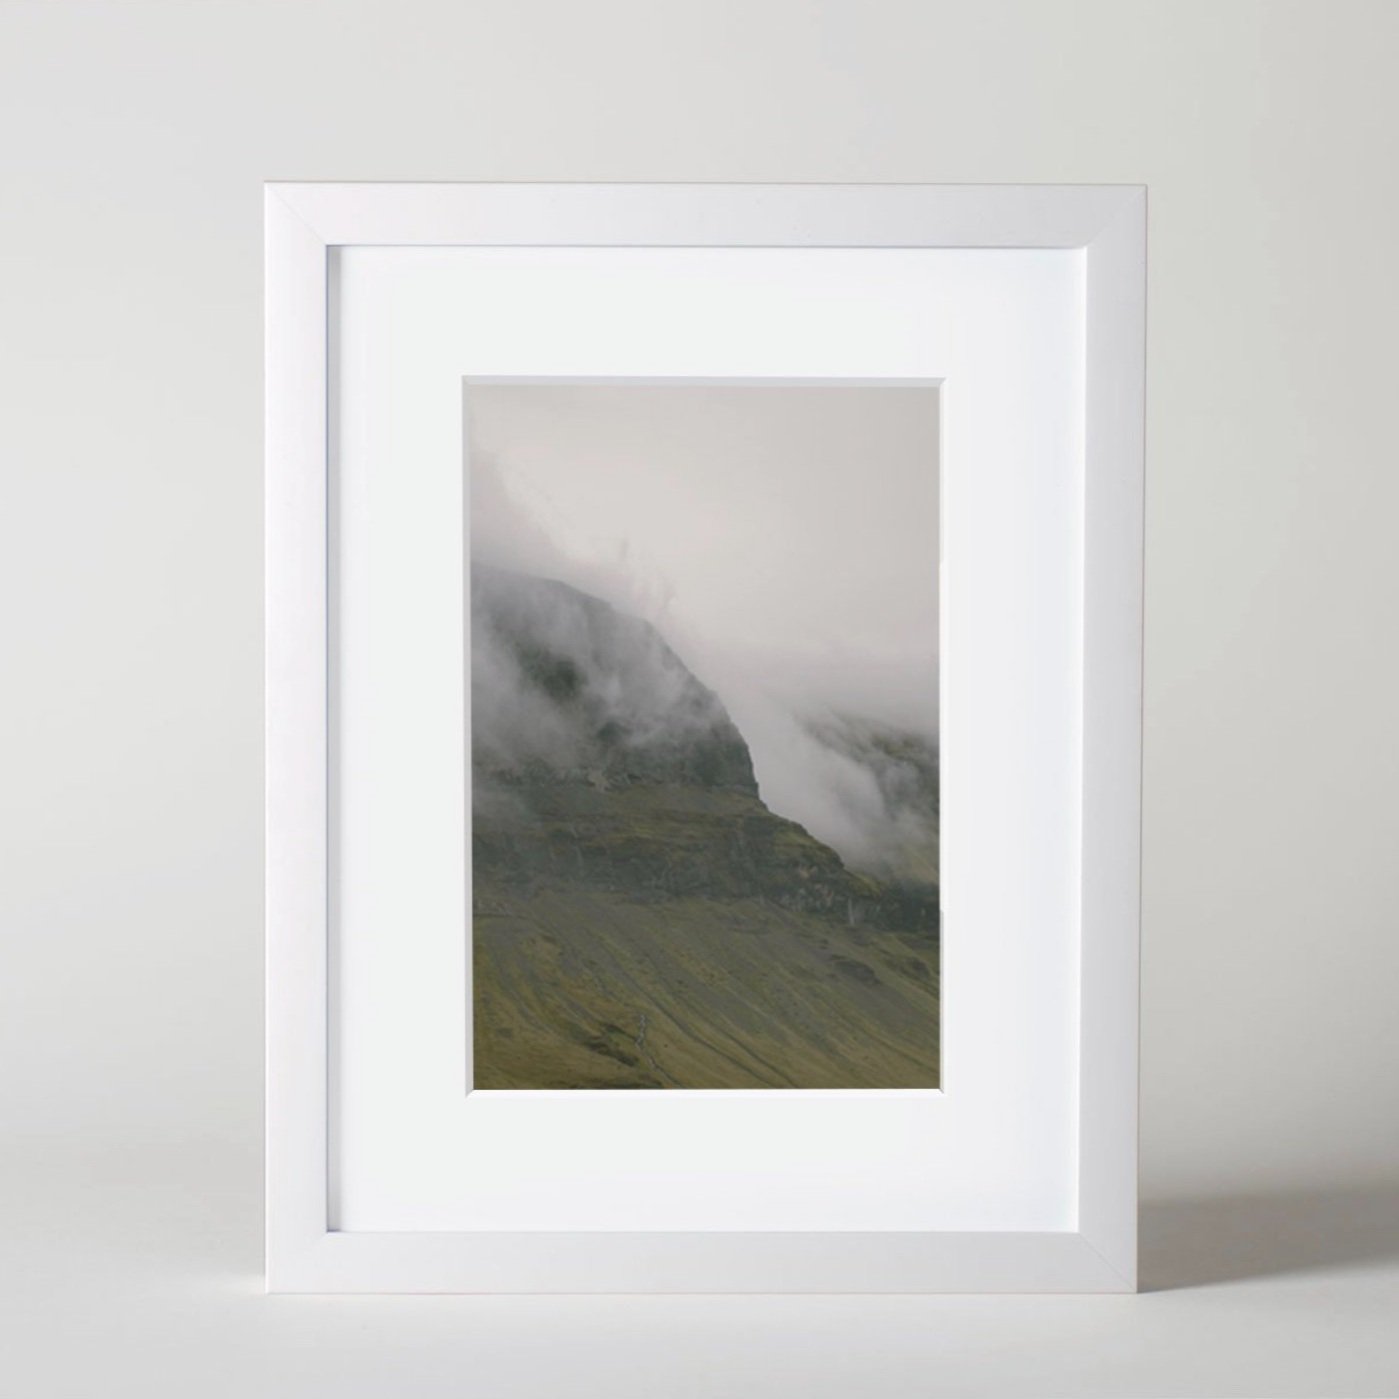 Products+matted+framed+print.jpg